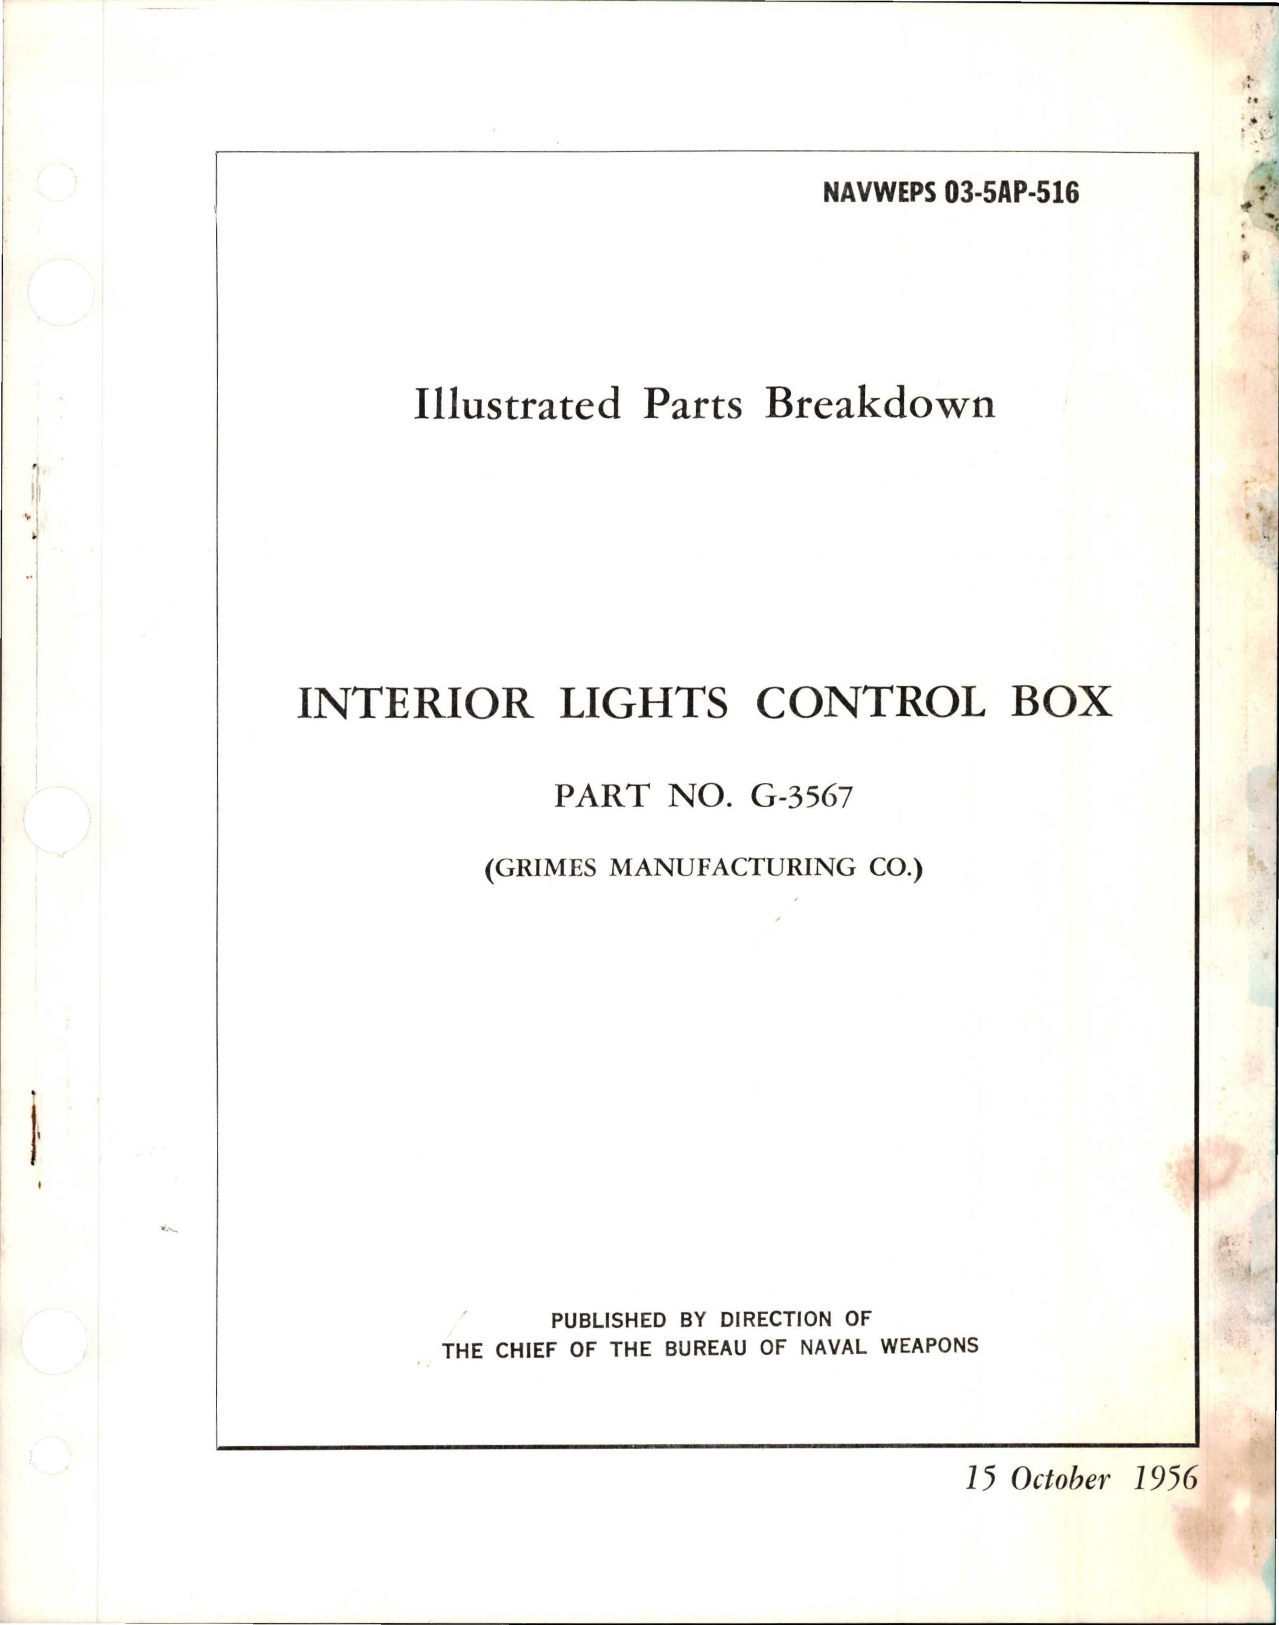 Sample page 1 from AirCorps Library document: Illustrated Parts Breakdown for Interior Lights Control Box - Part G-3567